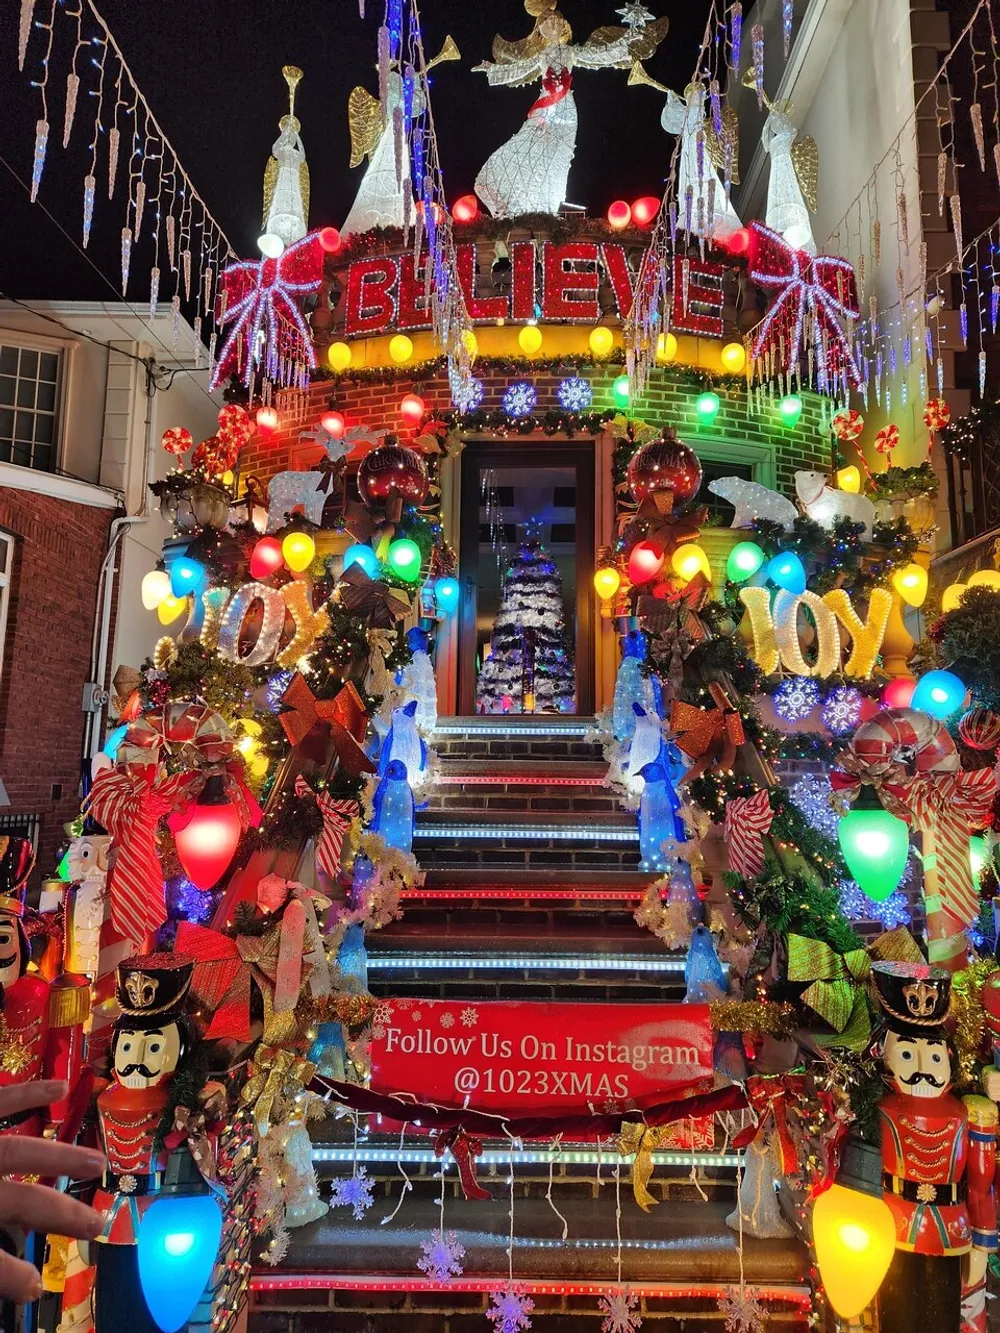 The image shows a brightly lit and festively decorated staircase with oversized Christmas ornaments nutcracker soldiers and the words BELIEVE and JOY conveying a vibrant holiday spirit